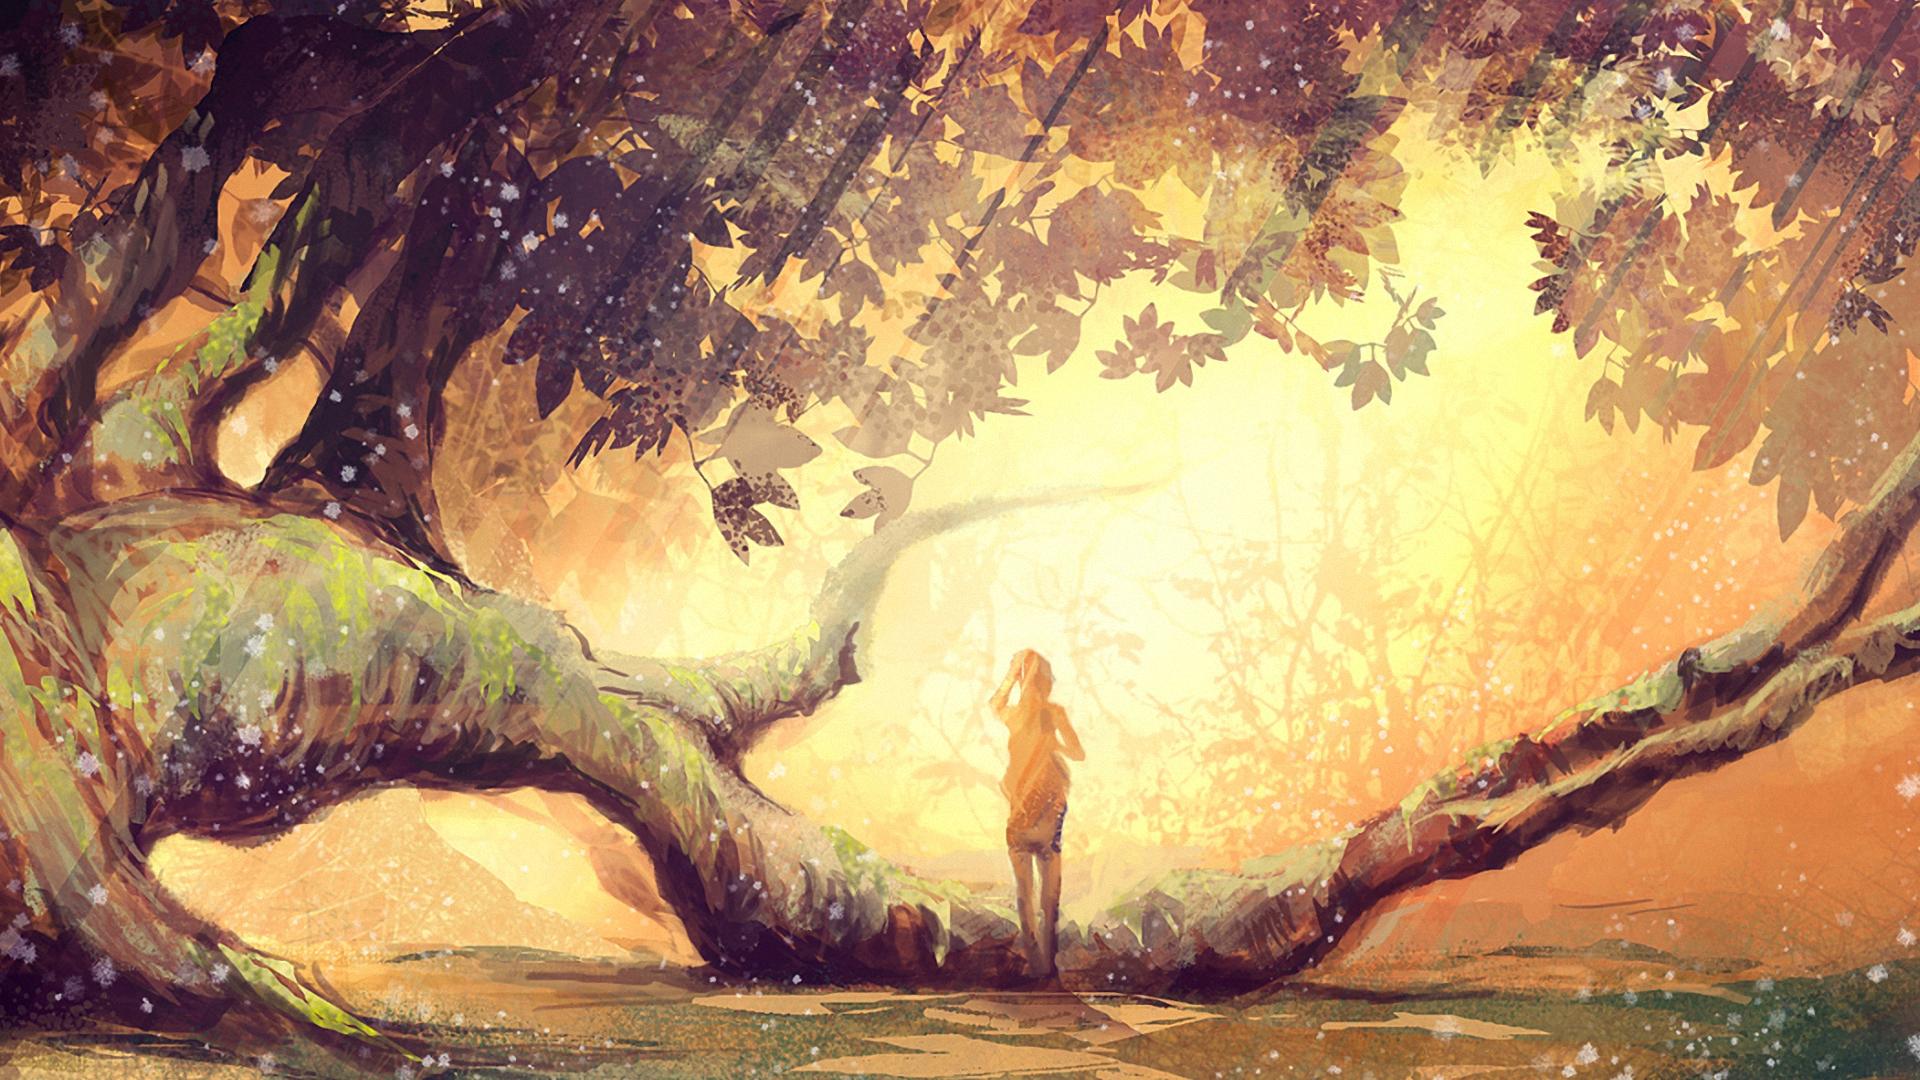 Fisihng In The Sunlit Forest River 1920X1200 Digital Art Wallpaper